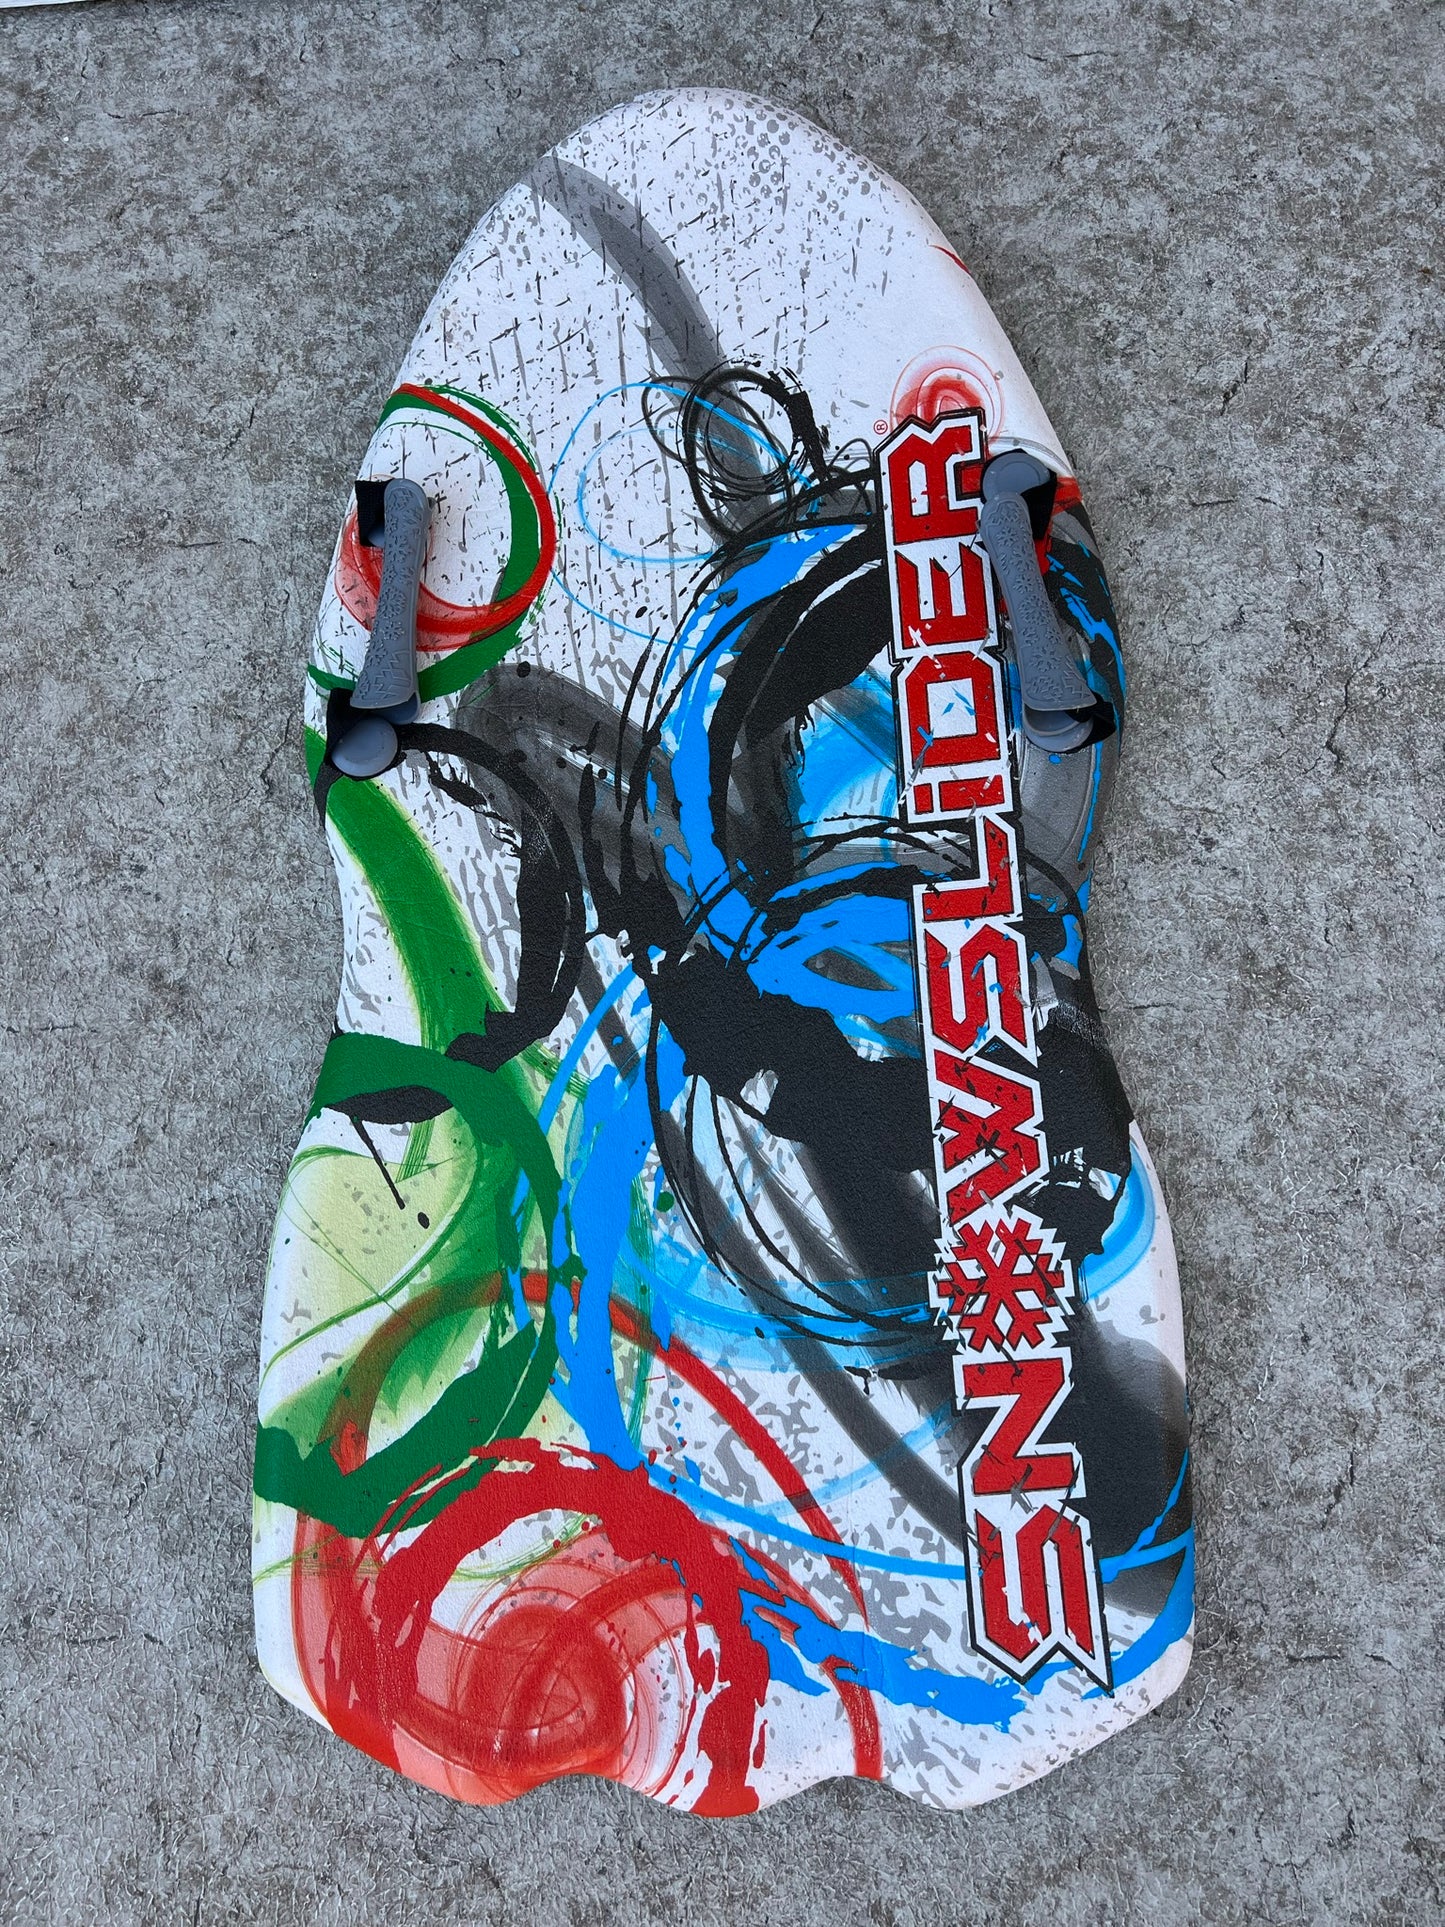 Snow Sled Ski Doo Foam Racing Sled Child Size 4-8 Excellent As New Grey Red Blue Multi